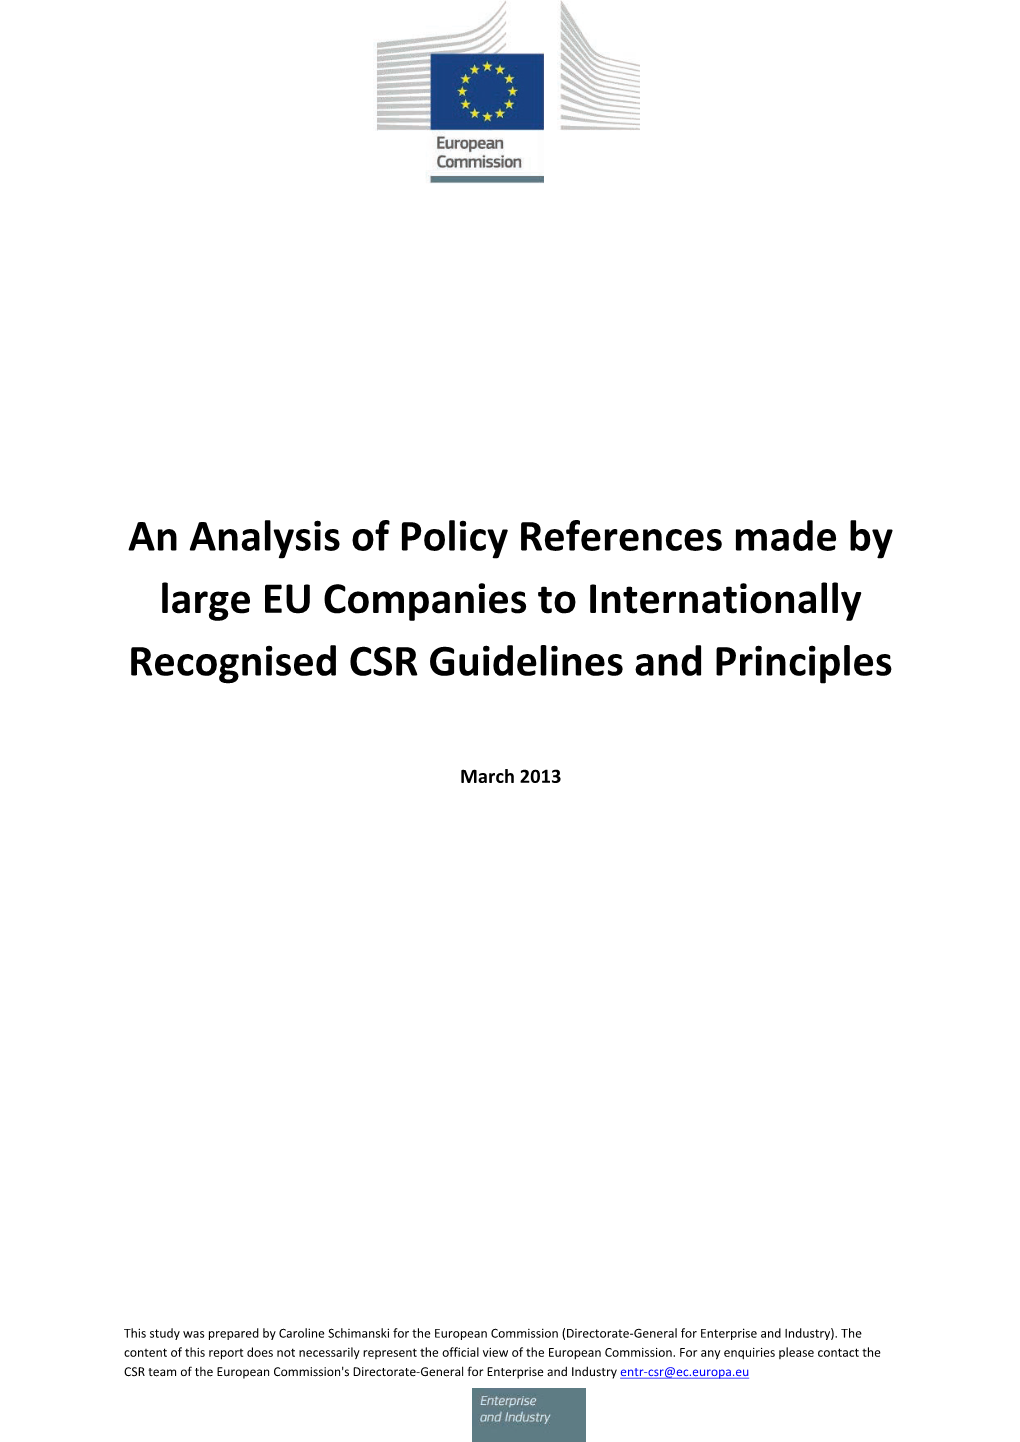 References to CSR Guidelines and Principles FINAL